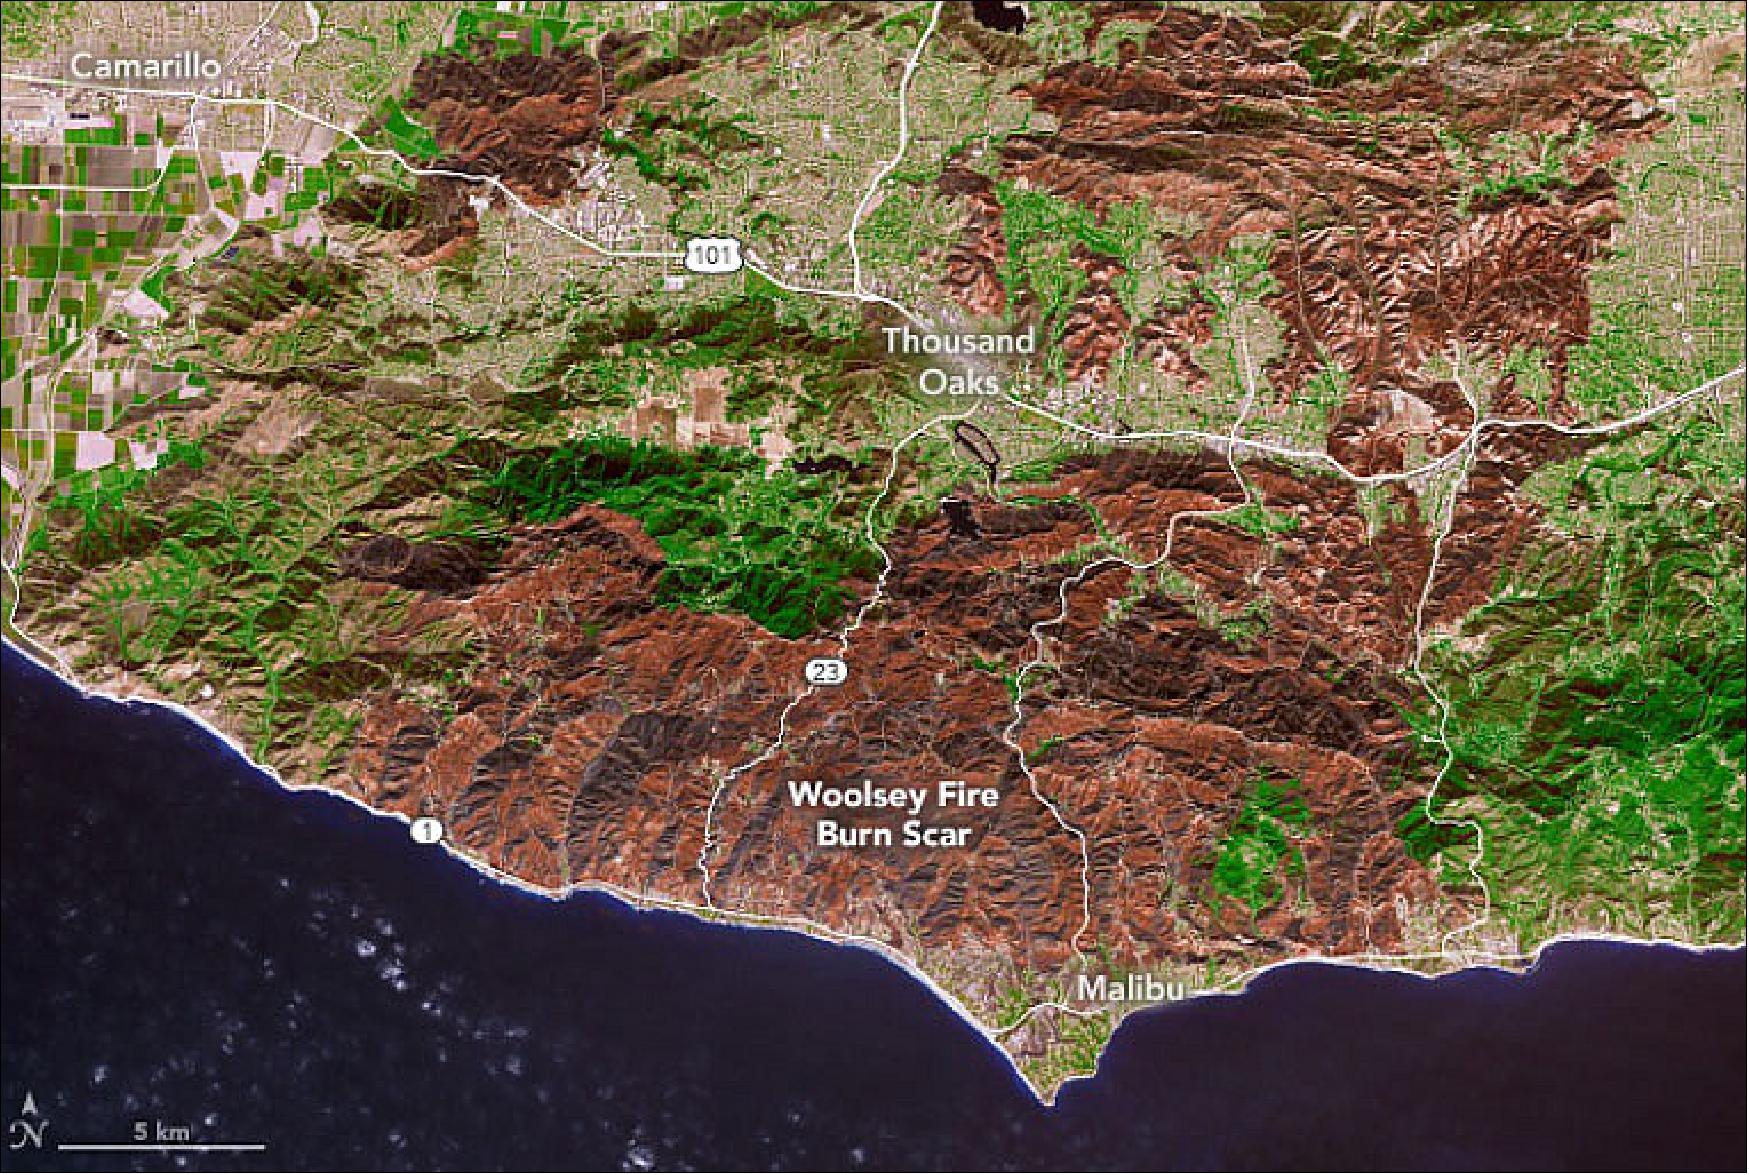 Figure 2: The Woolsey Fire burn scar, shown in red, was large enough to be visible from space, as seen in this view from NASA's Terra satellite. The colors in the image have been enhanced to simulate a more natural appearance (image credit: NASA Earth Observatory)